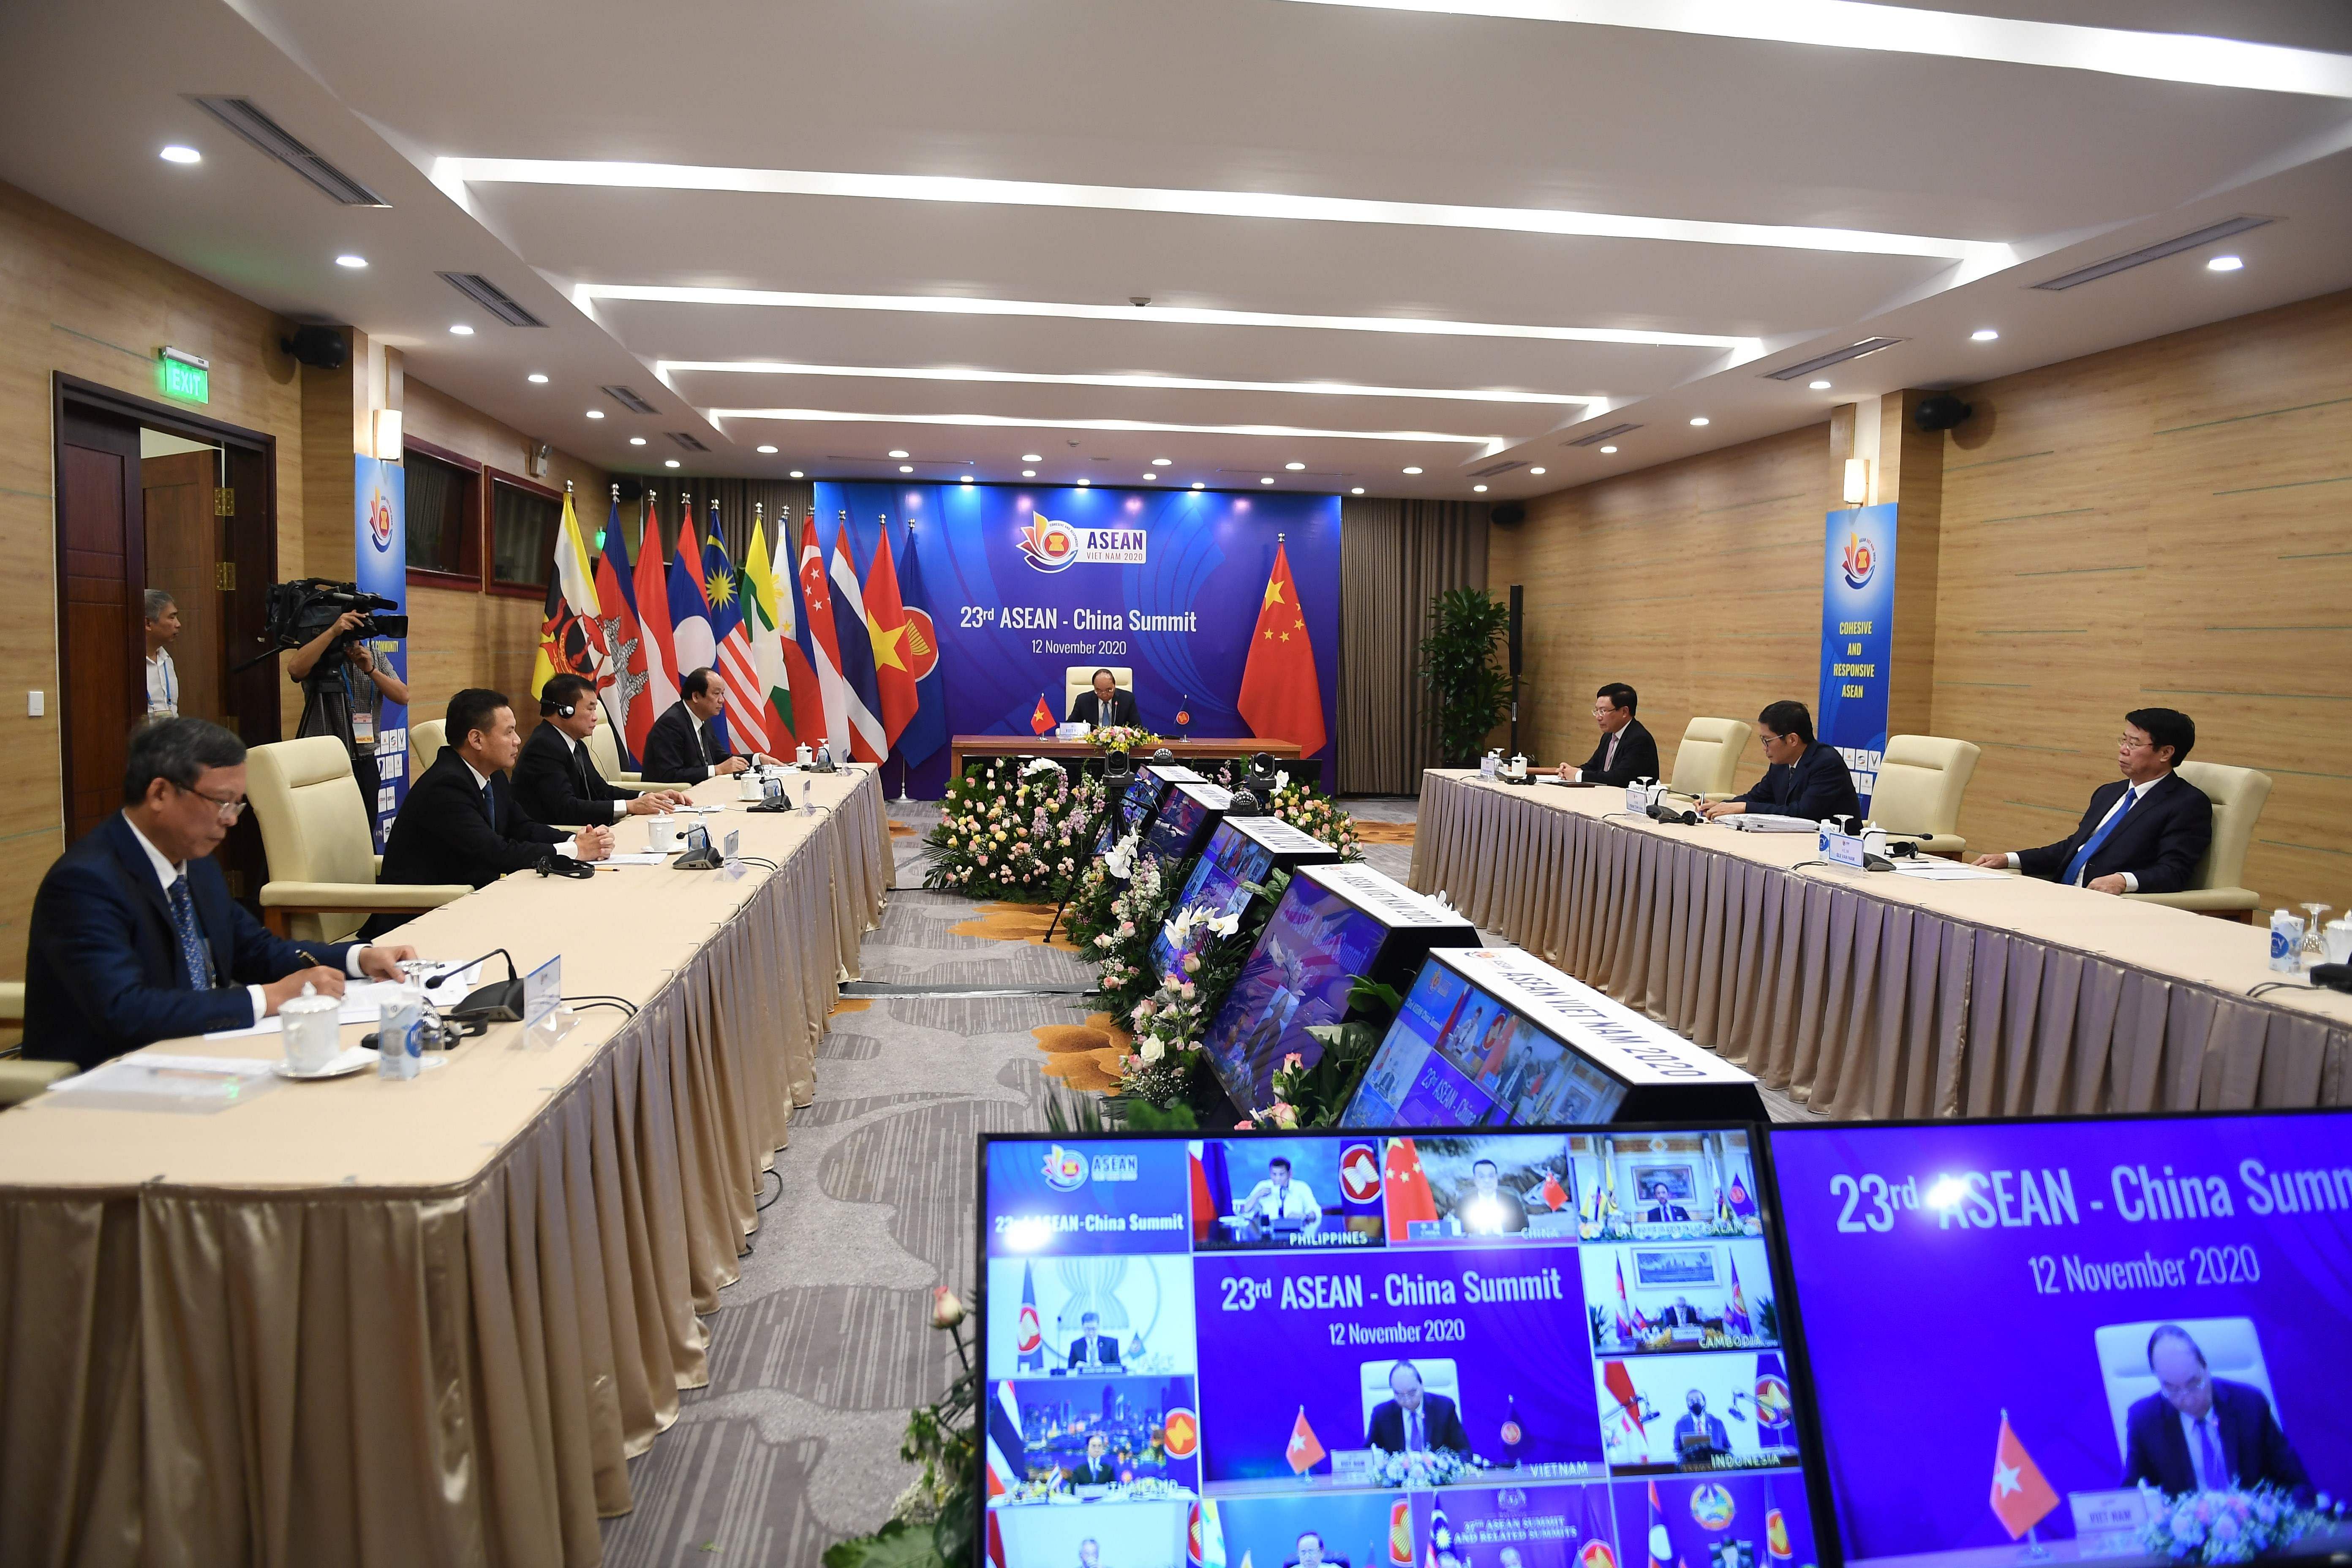 DIPLOMACY Vietnam's Prime Minister Nguyen Xuan Phuc addresses counterparts at the ASEAN-China summit of the Association of Southeast Asian Nations (ASEAN), held online due to the Covid-19 coronavirus pandemic, in Hanoi. Credits: AFP Photo